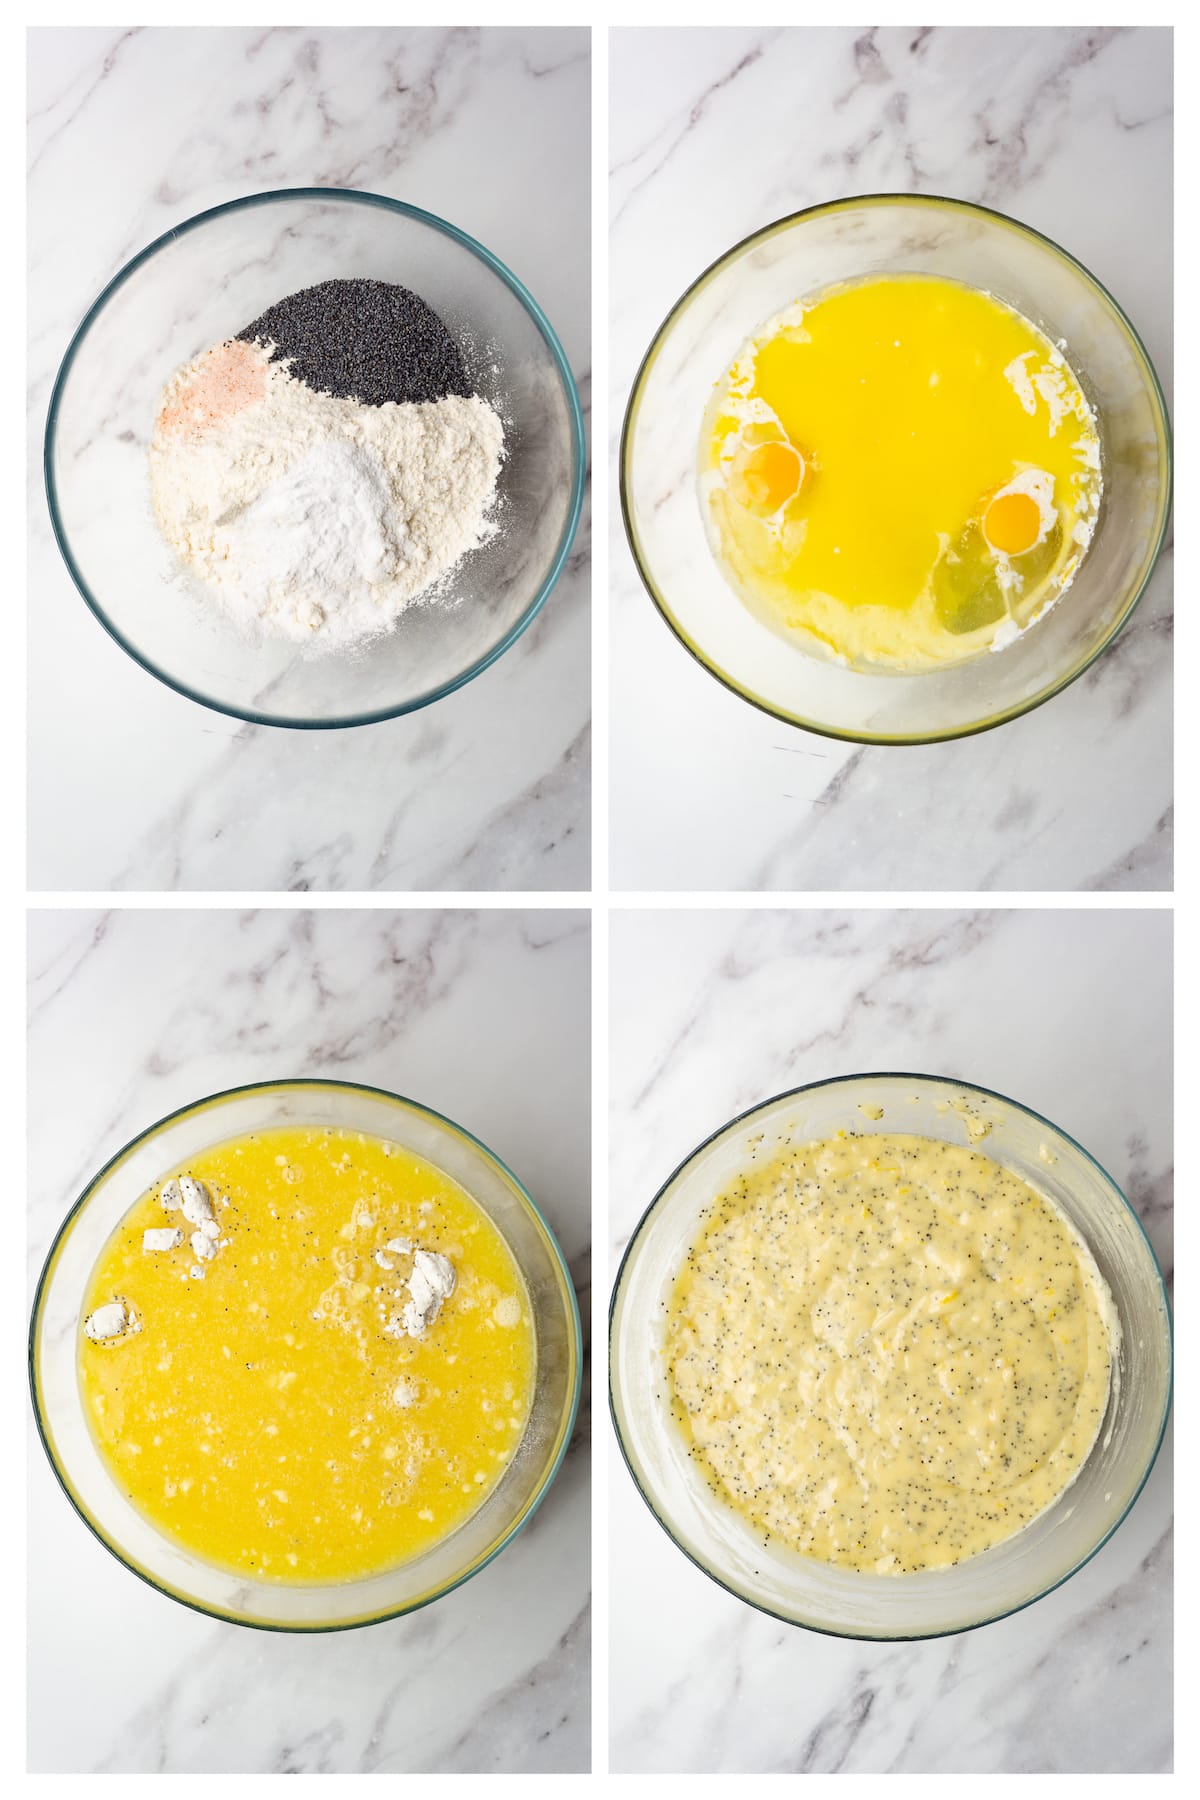 The collage image shows four steps to make the lemon poppy seed muffin batter.